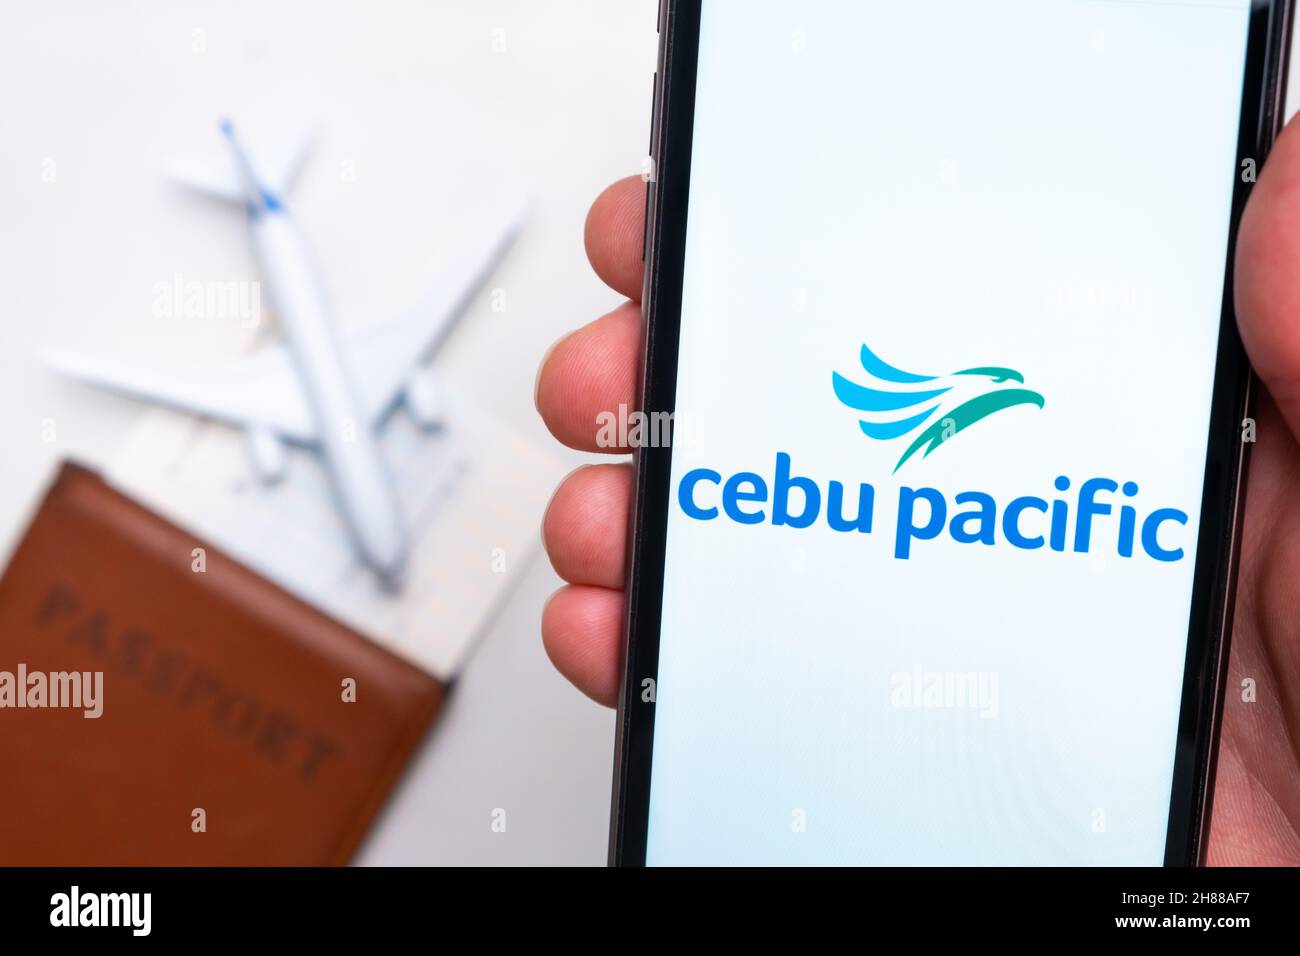 Cebu pacific Airlines app logo on the screen of mobile phone. A blurry image of a plane, a passport and boarding pass on the background. November 2021, San Francisco, USA Stock Photo